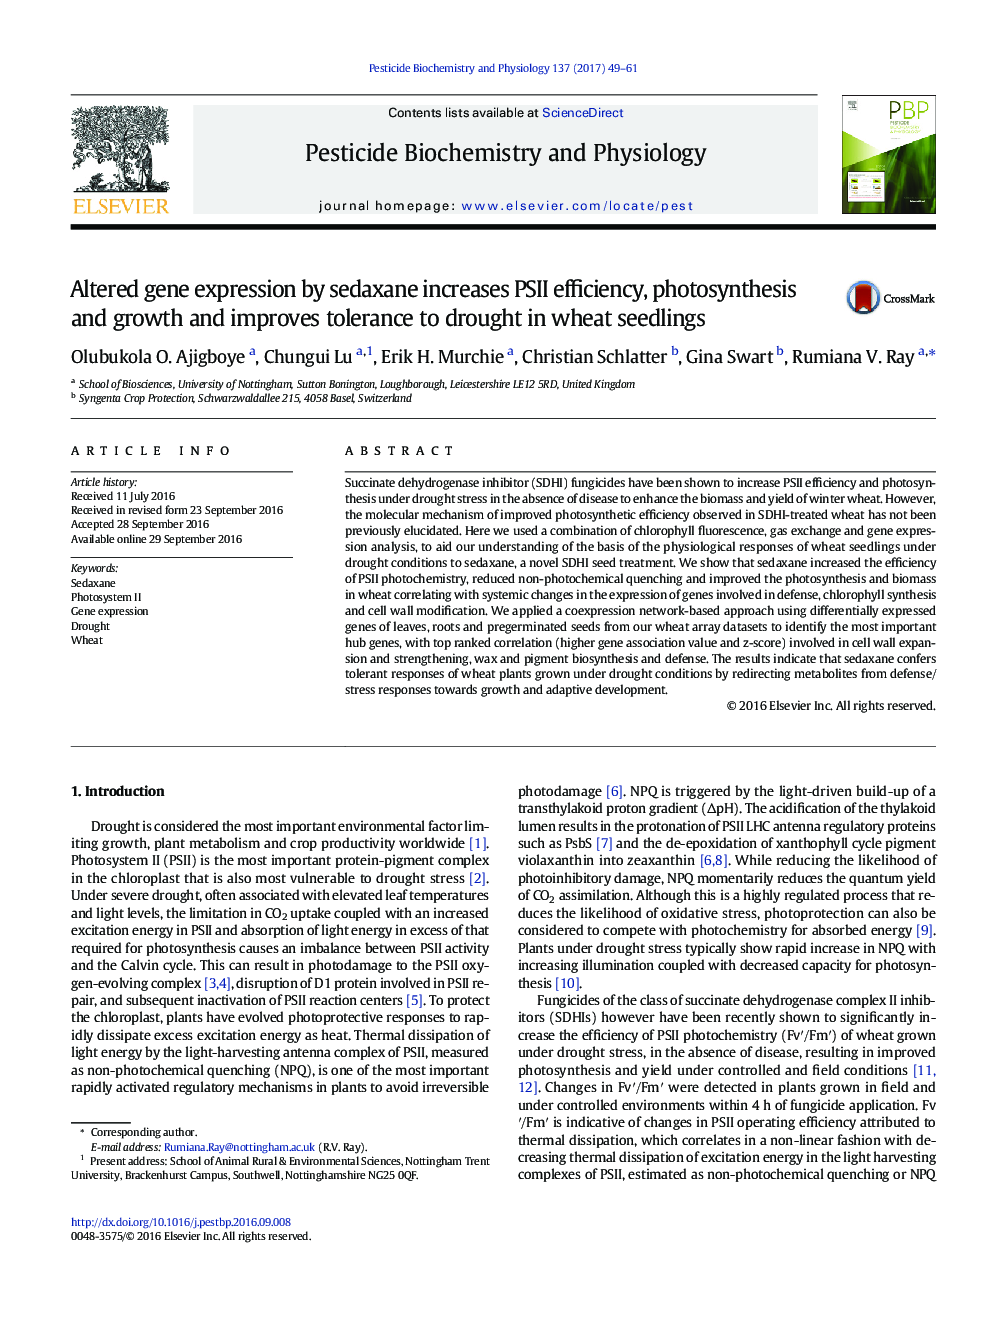 Altered gene expression by sedaxane increases PSII efficiency, photosynthesis and growth and improves tolerance to drought in wheat seedlings